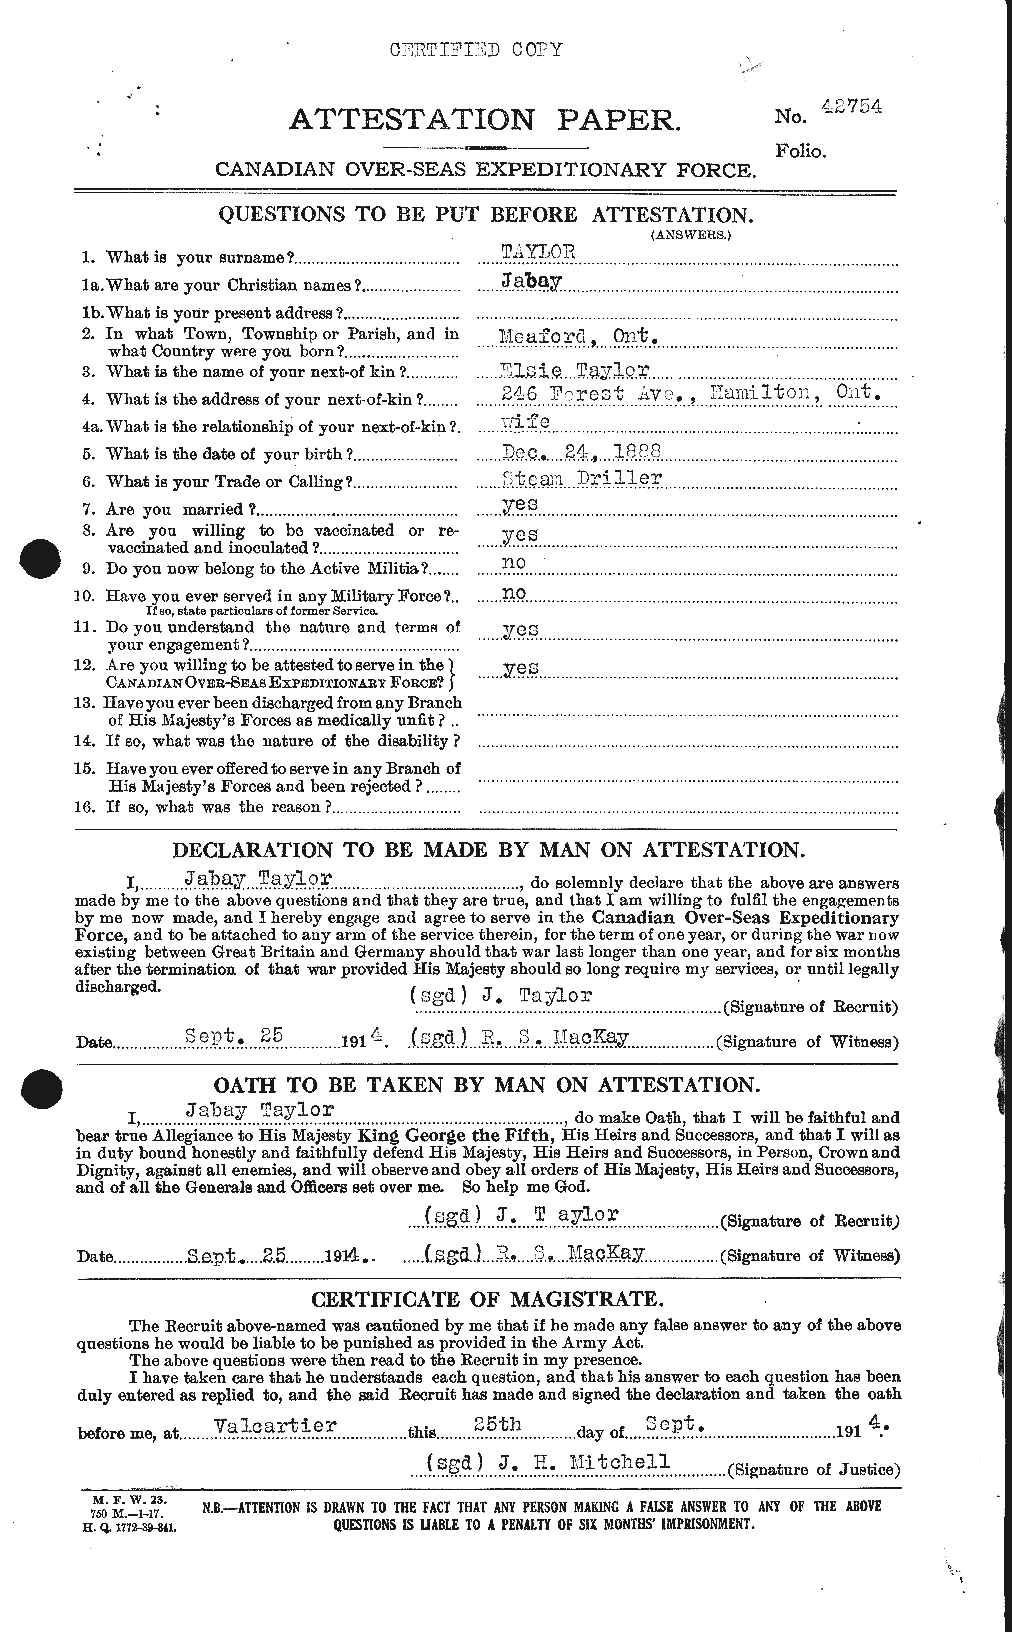 Personnel Records of the First World War - CEF 626638a